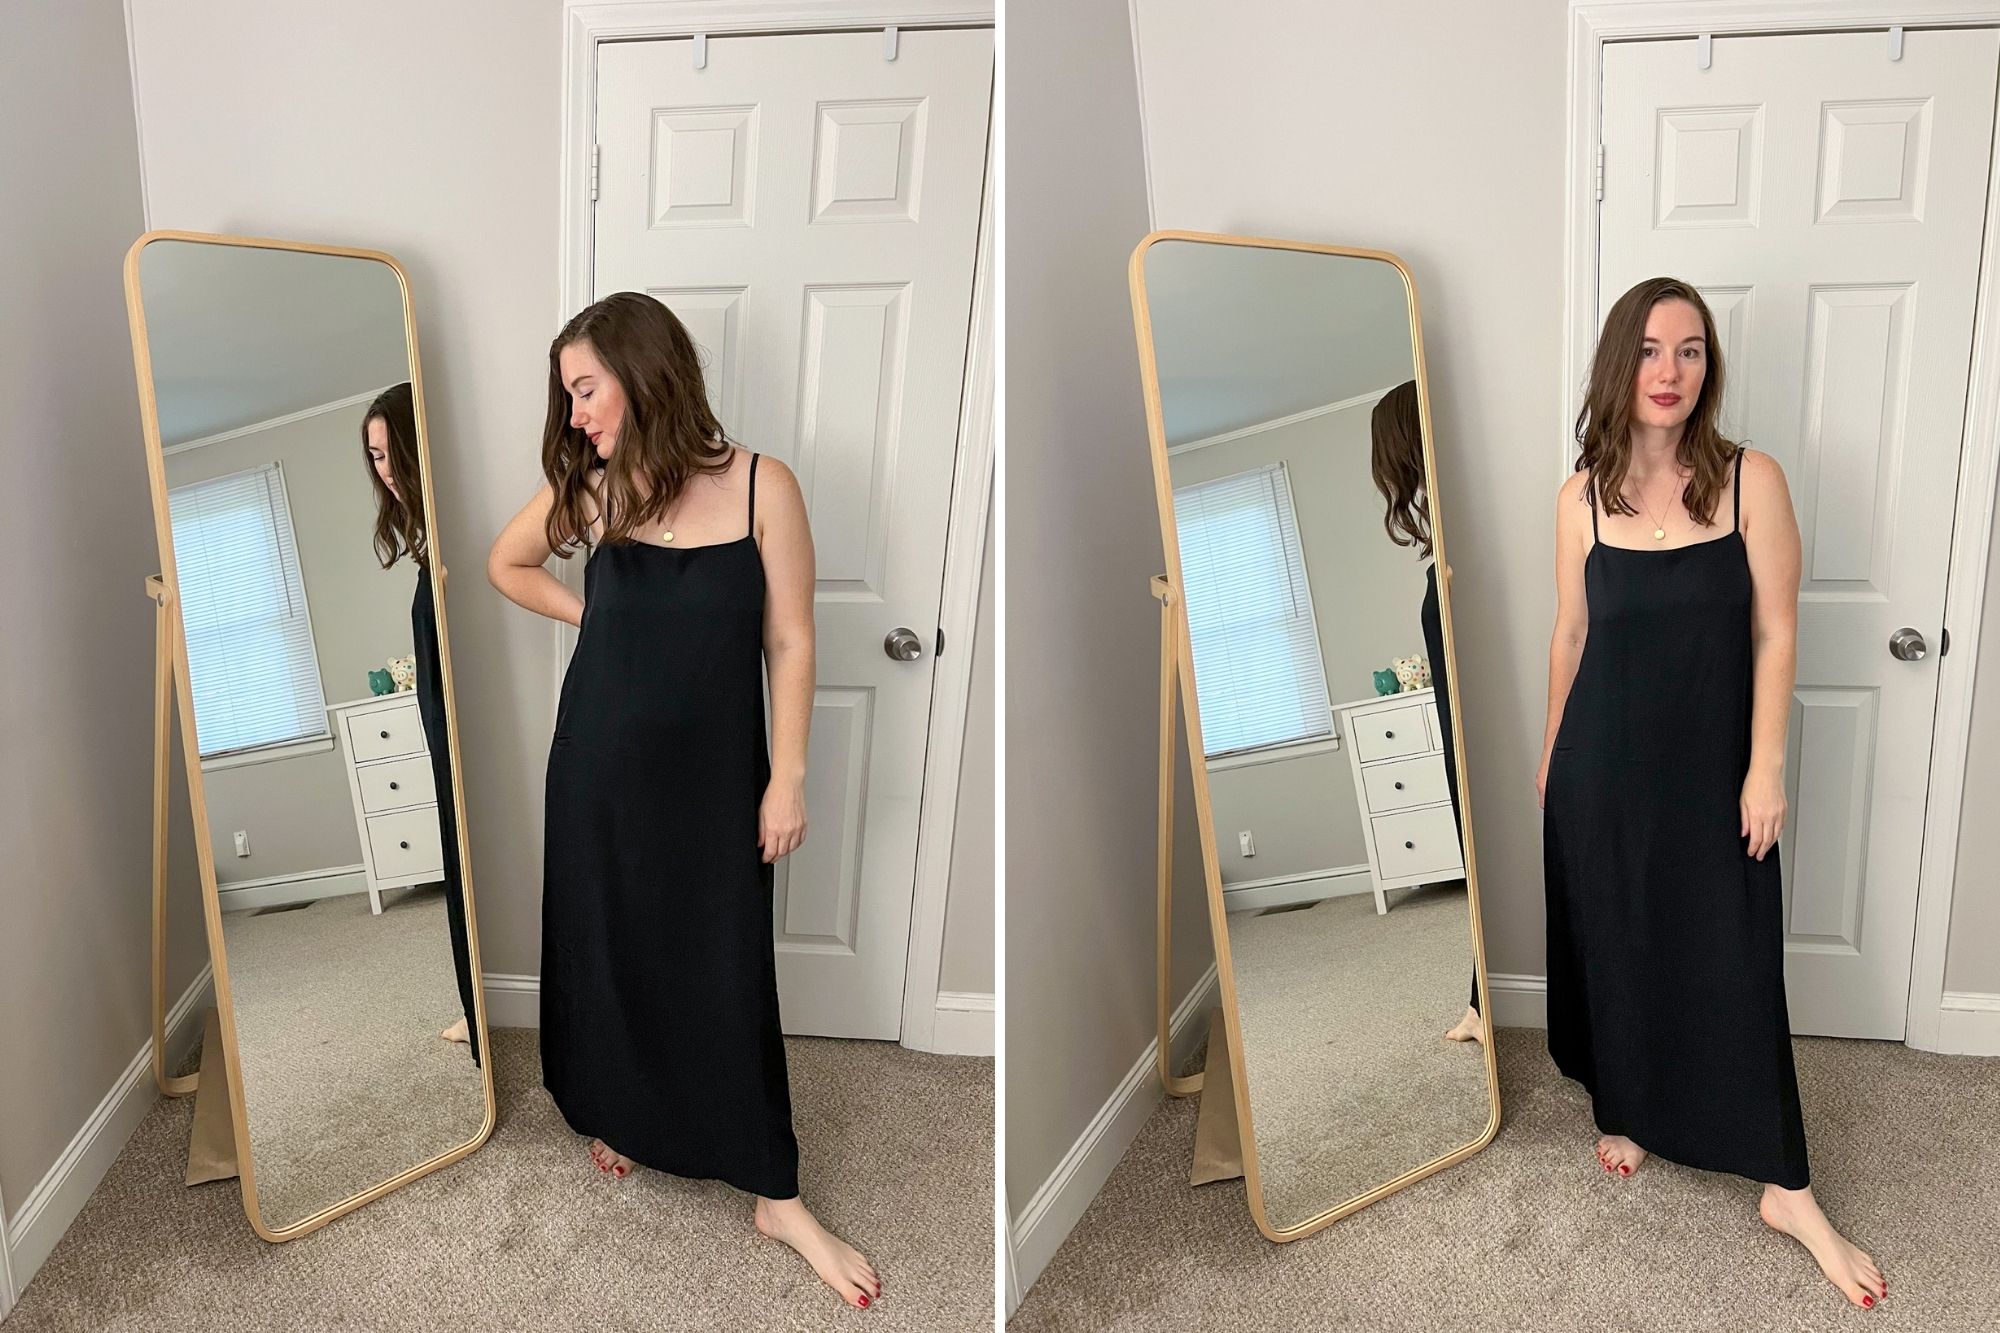 Alyssa wears the dress in two different images